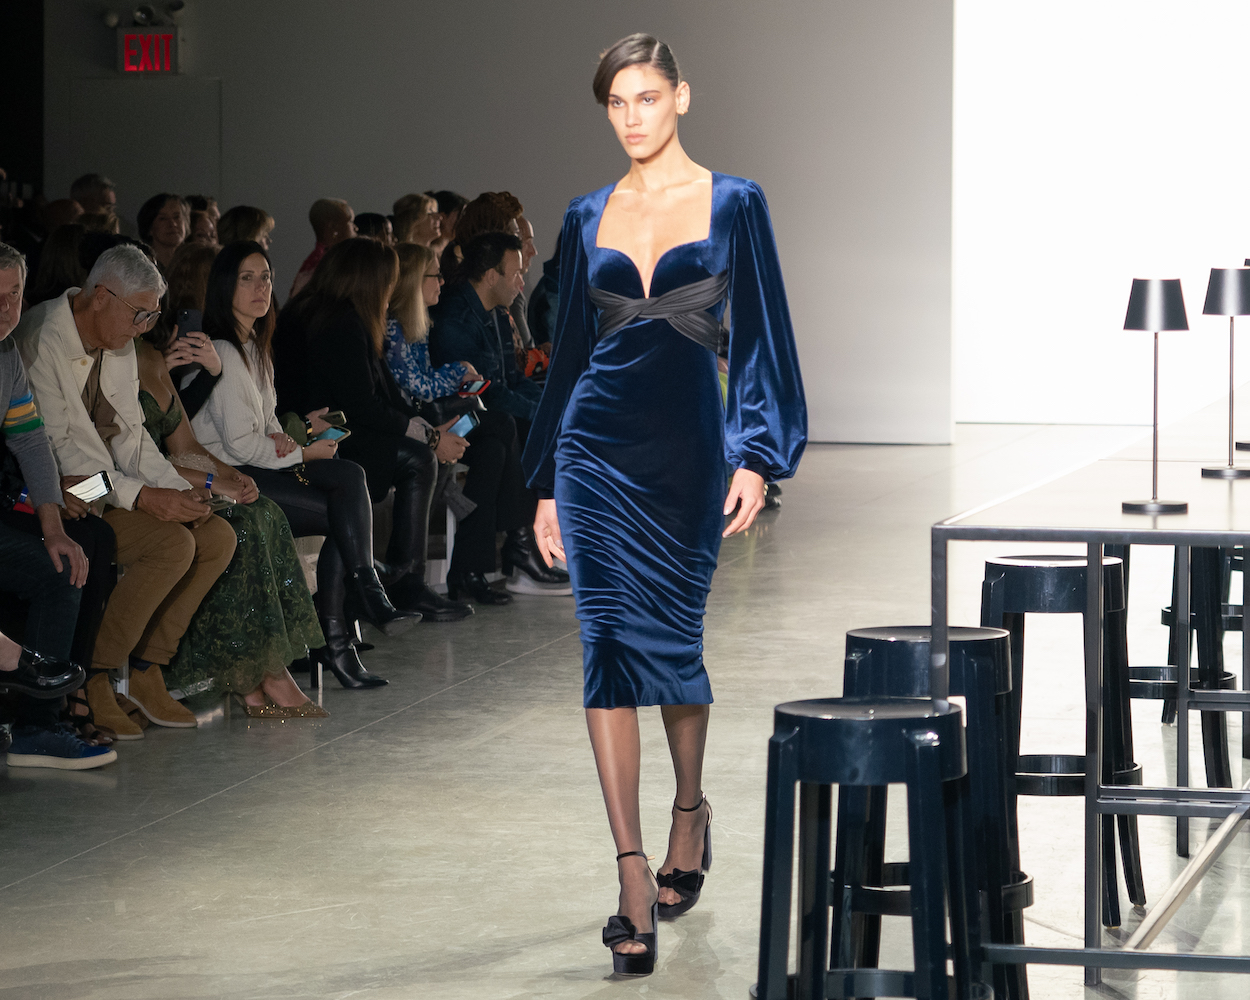 A model walking down the runway in a velvet blue dress with balloon sleeves and black heels.